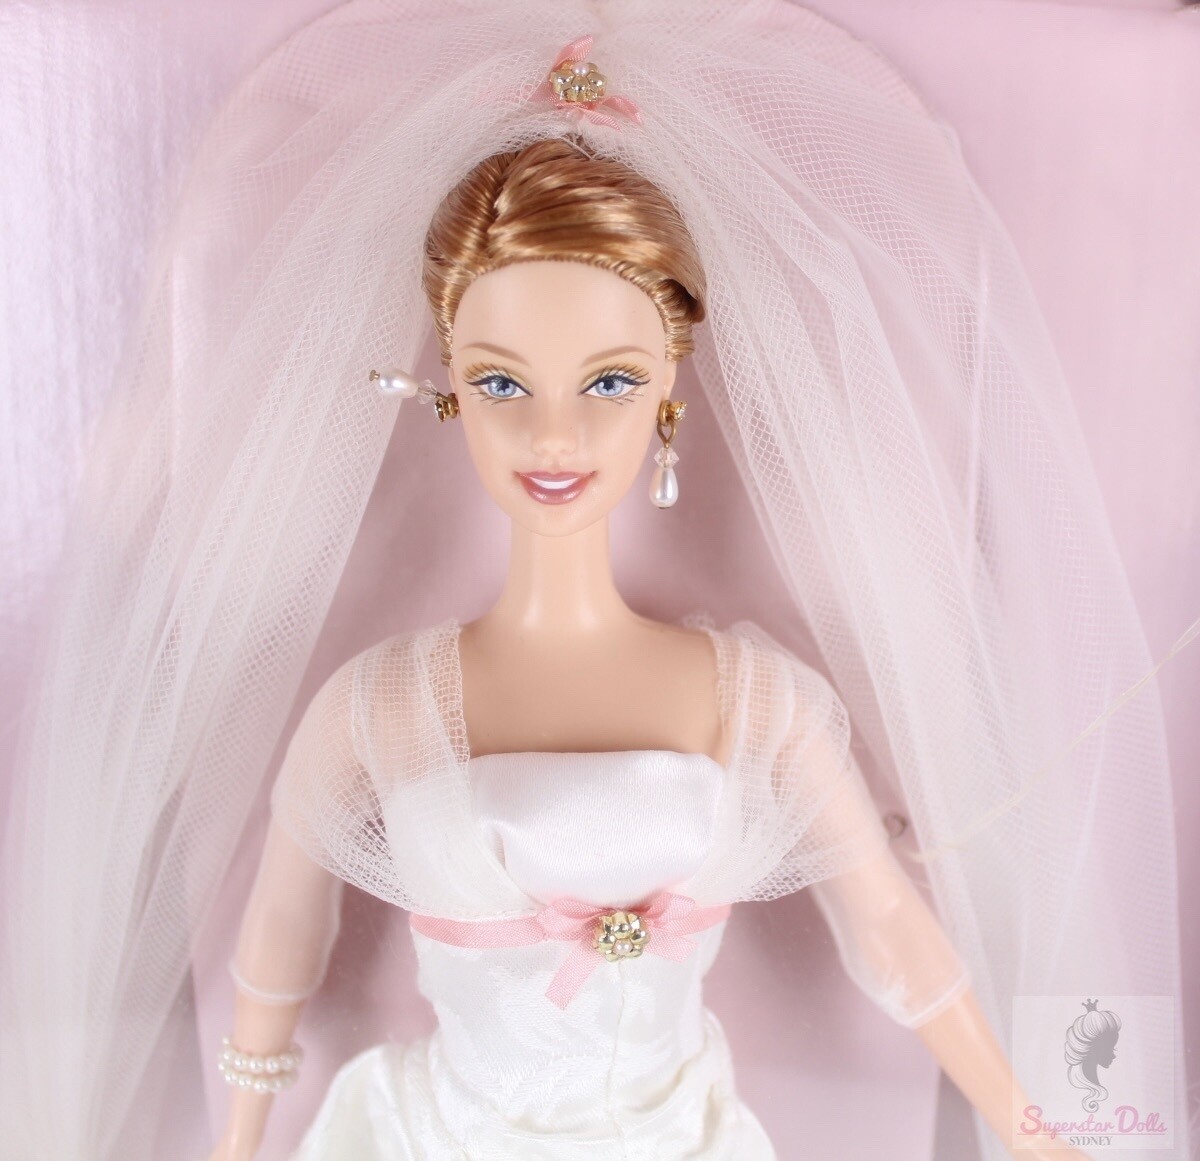 2002 Collector Edition: Sophisticated Wedding Barbie Doll